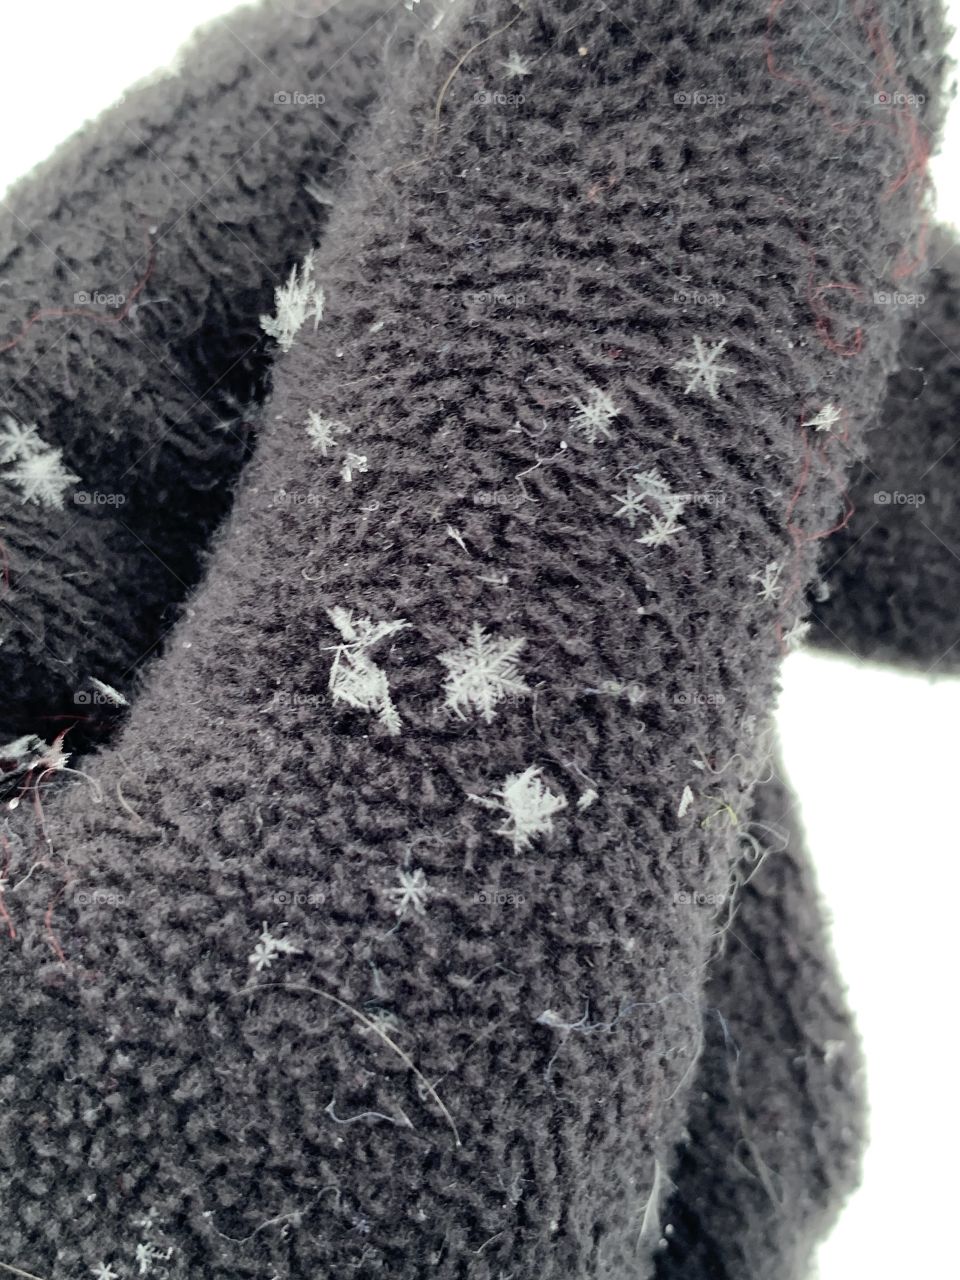 More snowflakes that are still clearly detailed